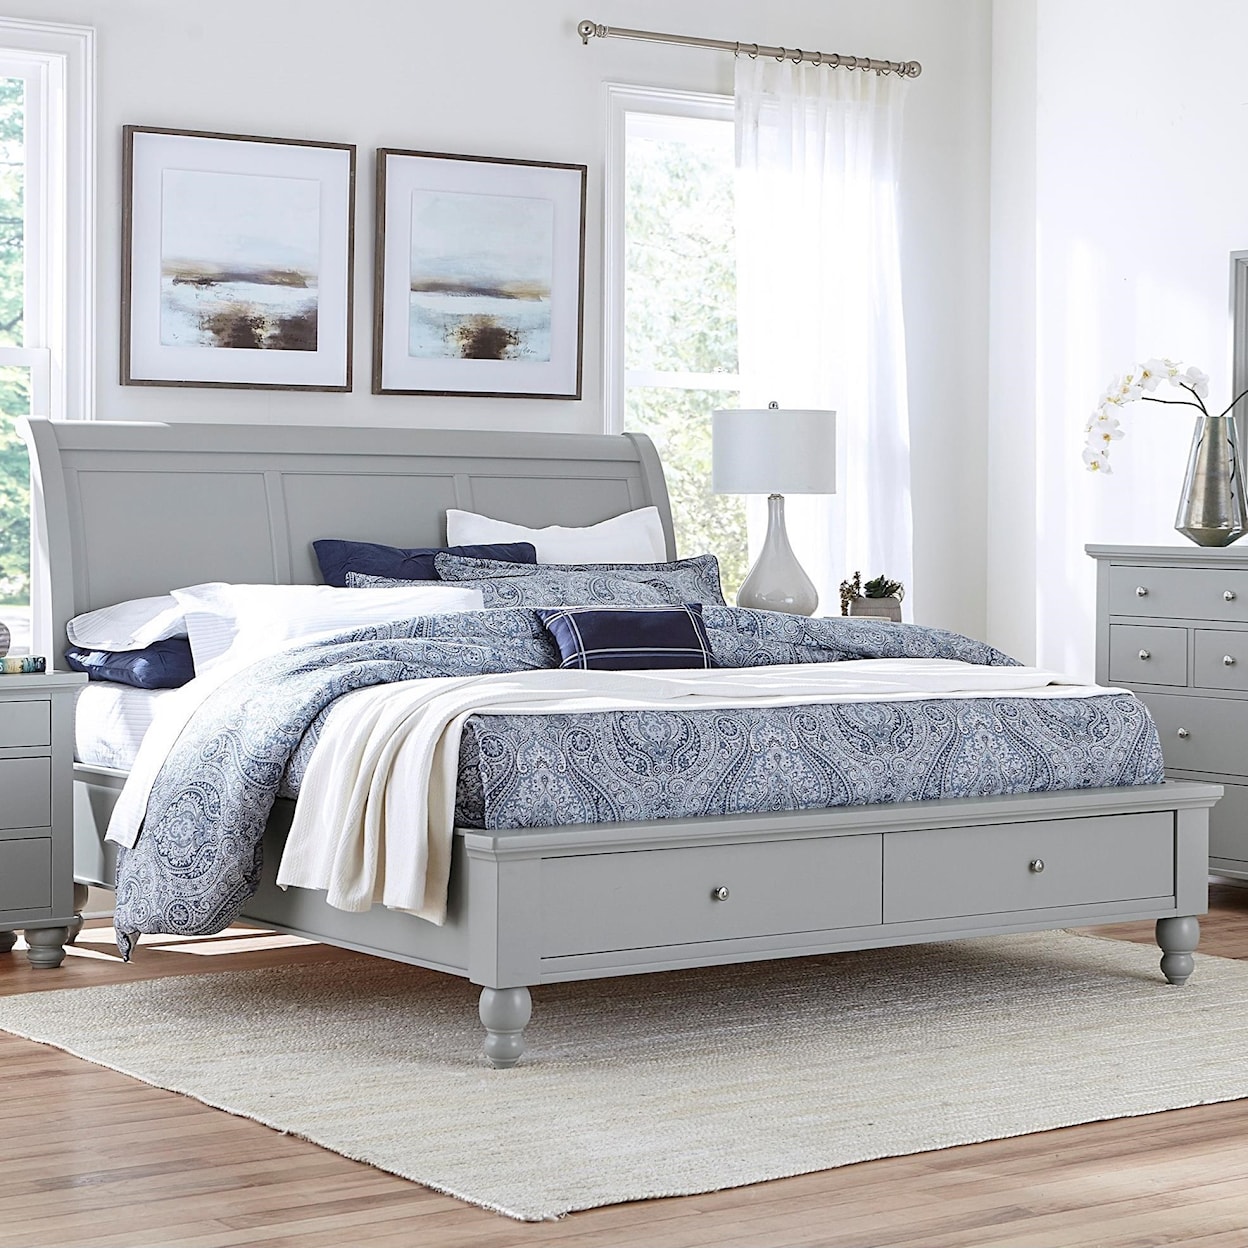 Aspenhome Cambridge Queen Sleigh Bed With Storage Drawers